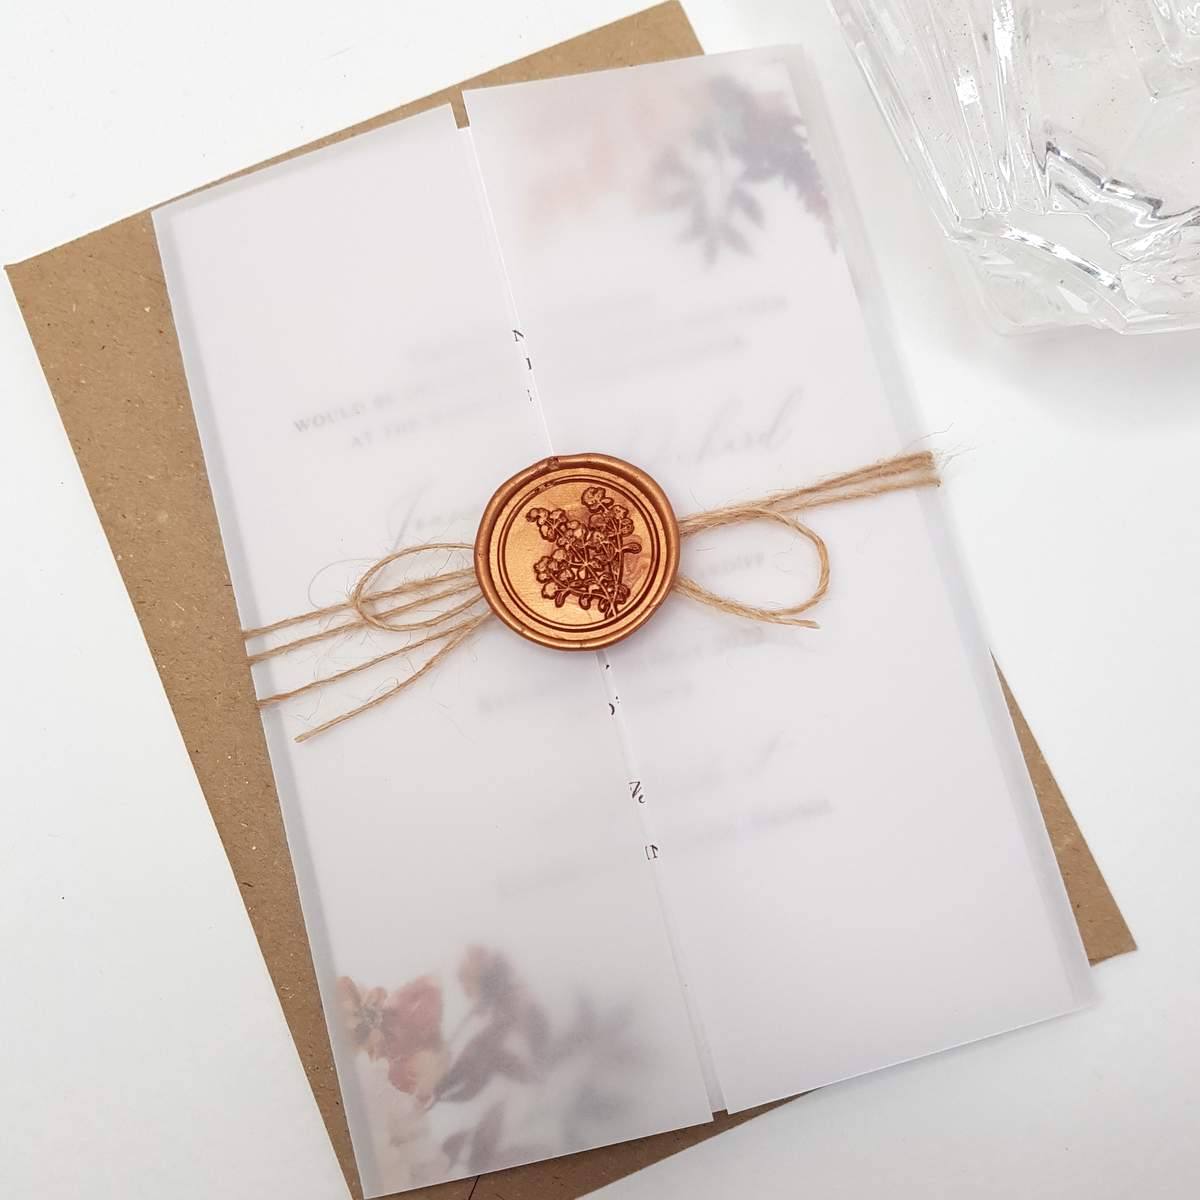 autumn design wedding invitation printed on recycled paper with a vellum jacket, jute twine and a copper wax seal